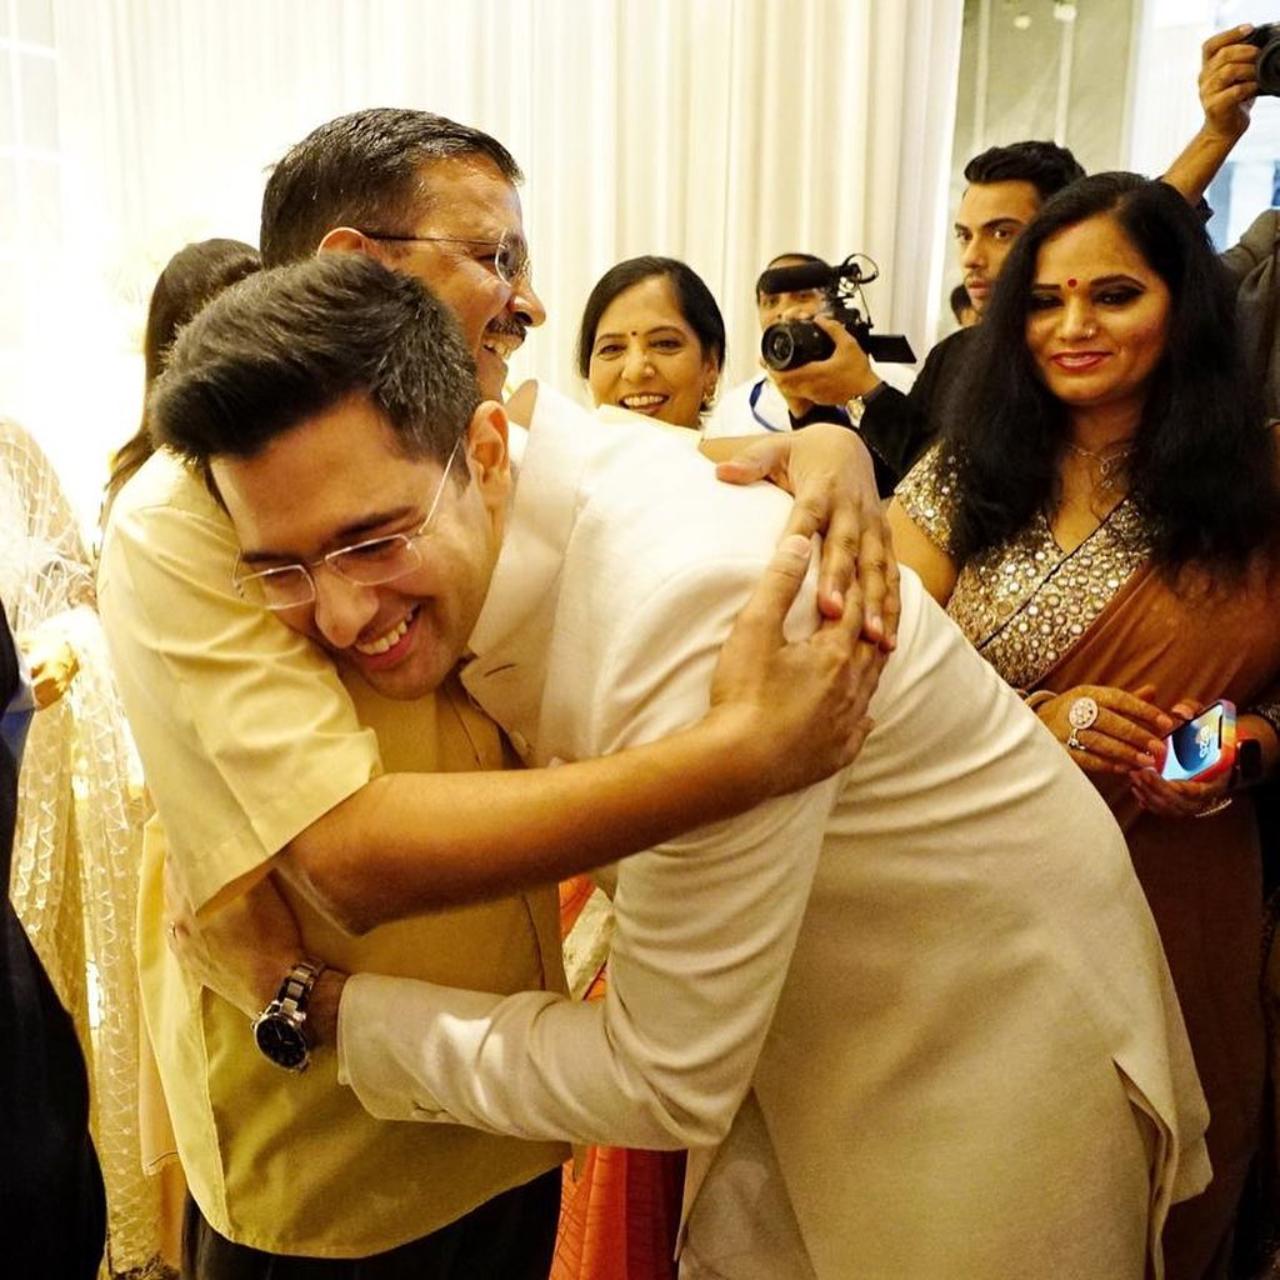 Arvind Kejriwal took to his social media handle to wish the couple. In one of the pictures, he is seen giving Raghav hug